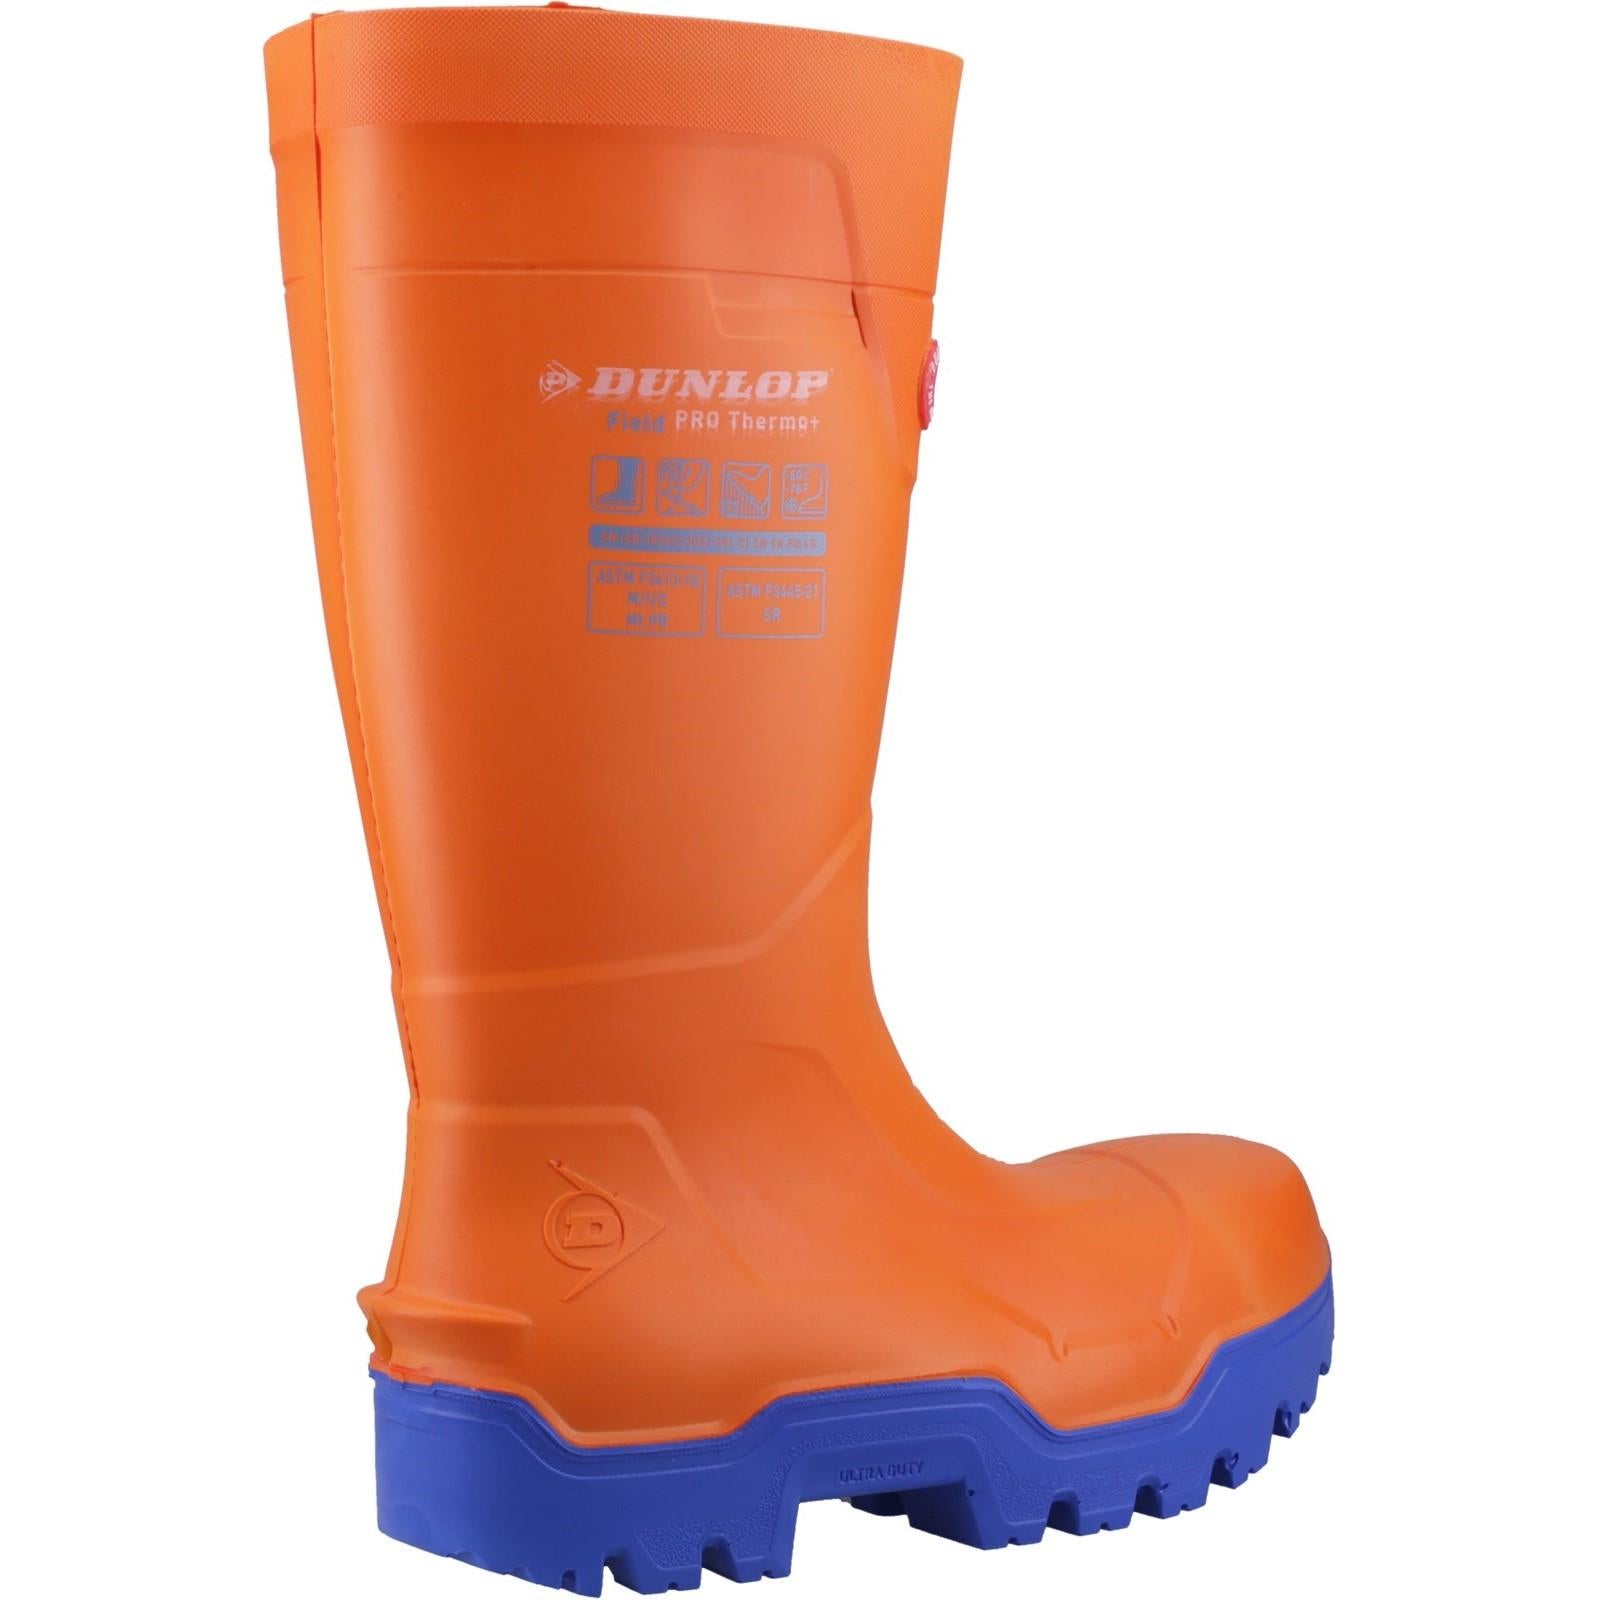 Dunlop FIELDPRO THERMO+ Safety Wellington Boots